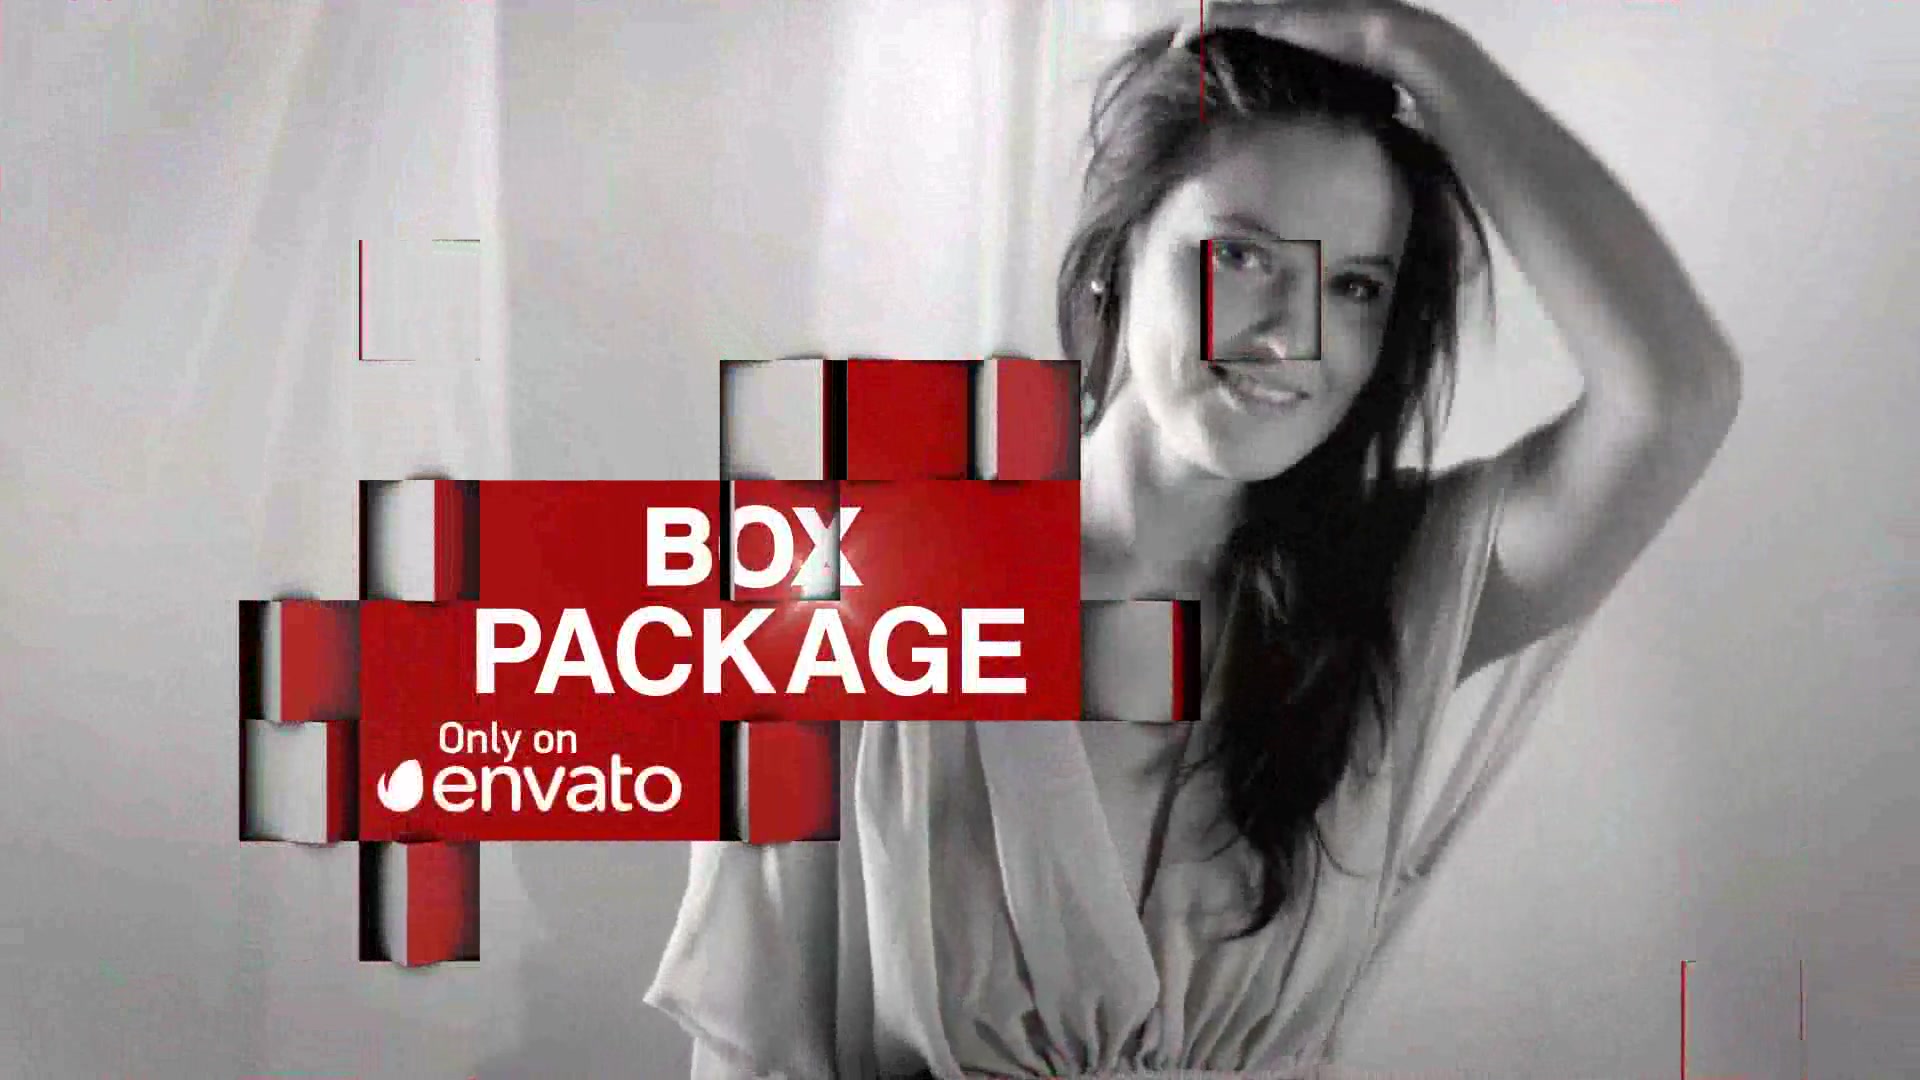 Box Package - Download Videohive 8686843